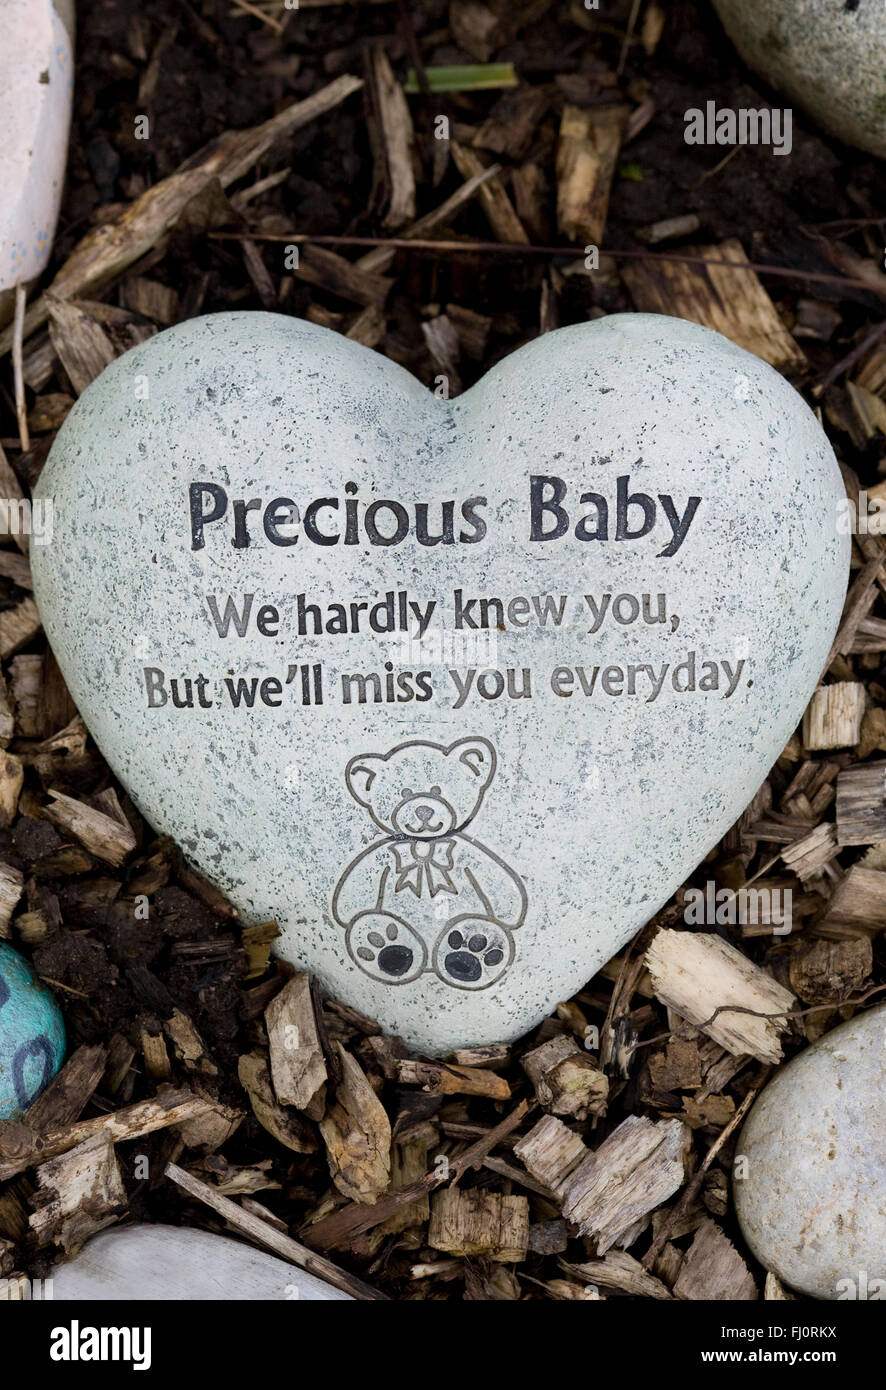 Hand Painted Remembrance Stones in a Graveyard 'Heart shaped Precious baby Stone' Stock Photo